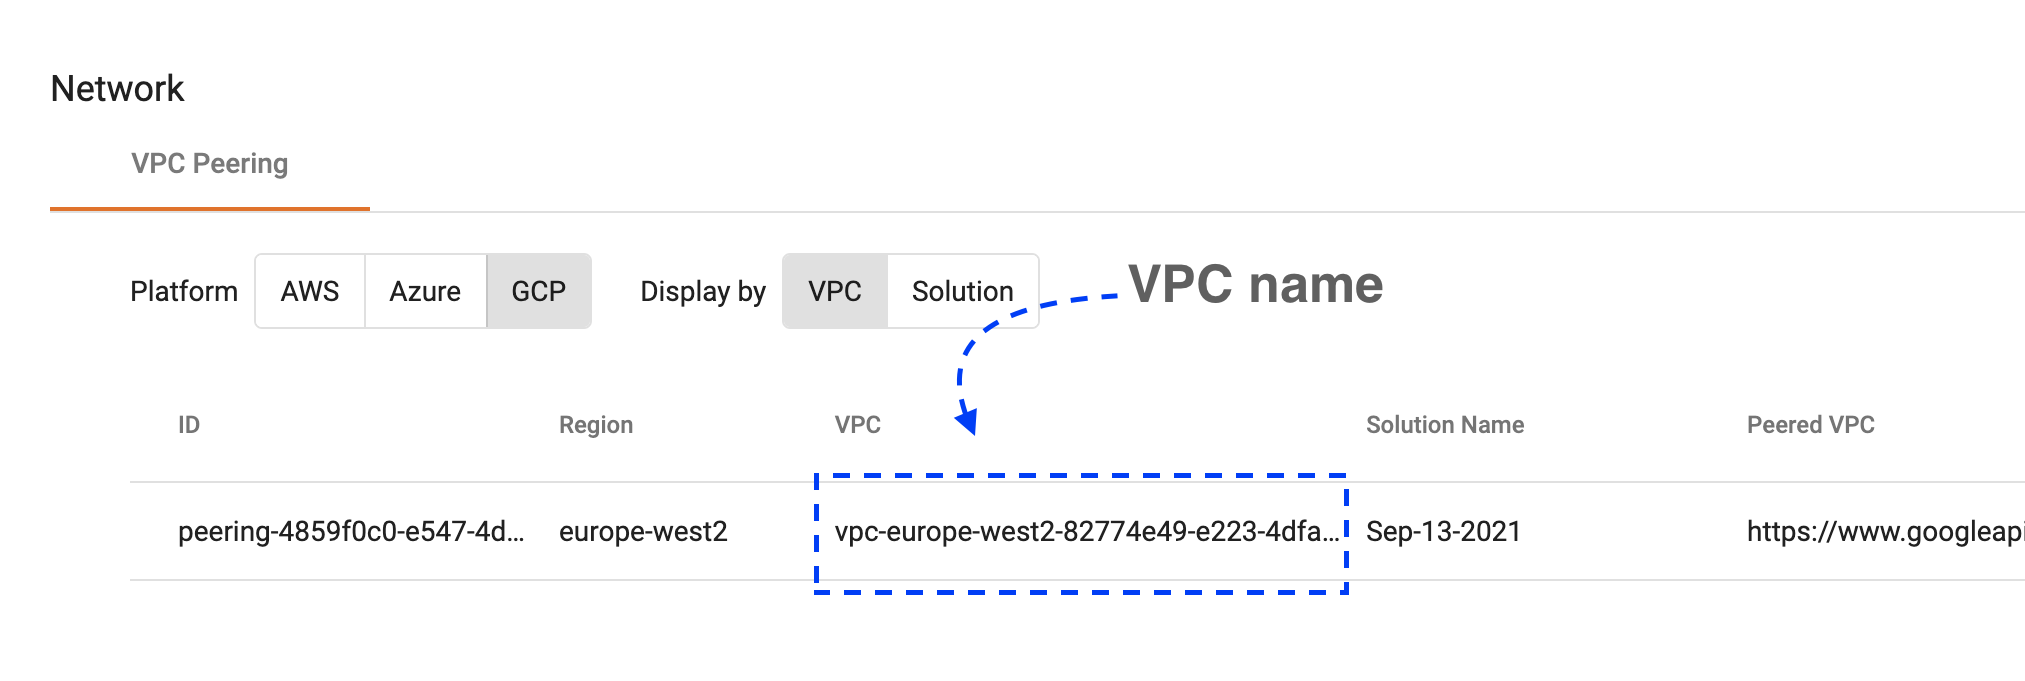 Location of VPC name